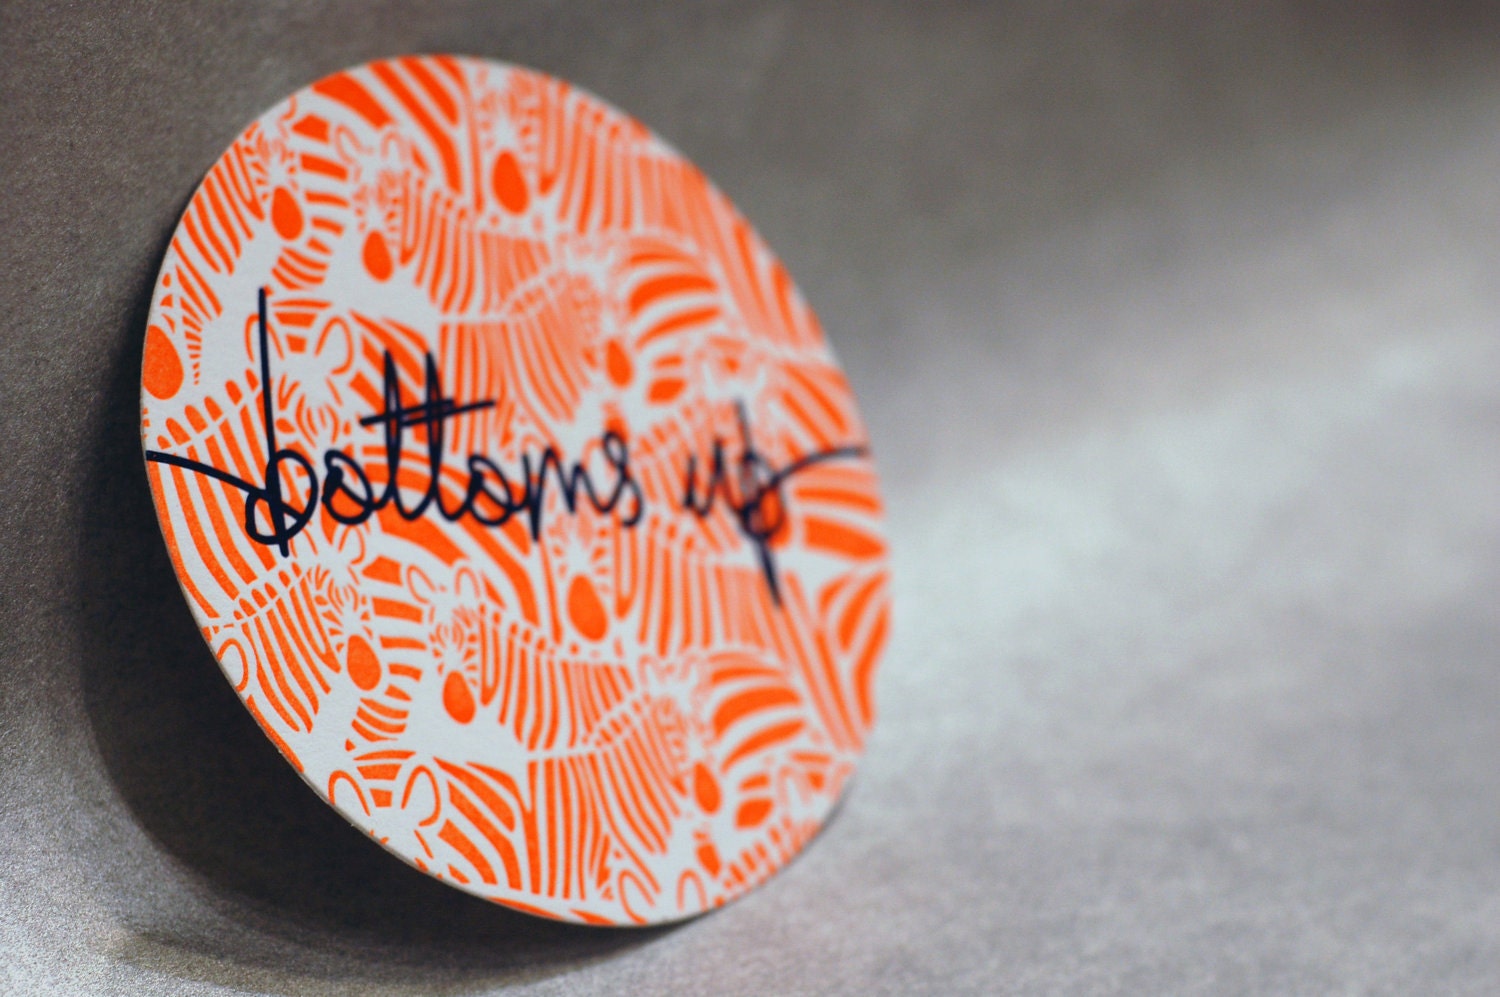 Letterpressed Neon Coasters - "Bottoms up"